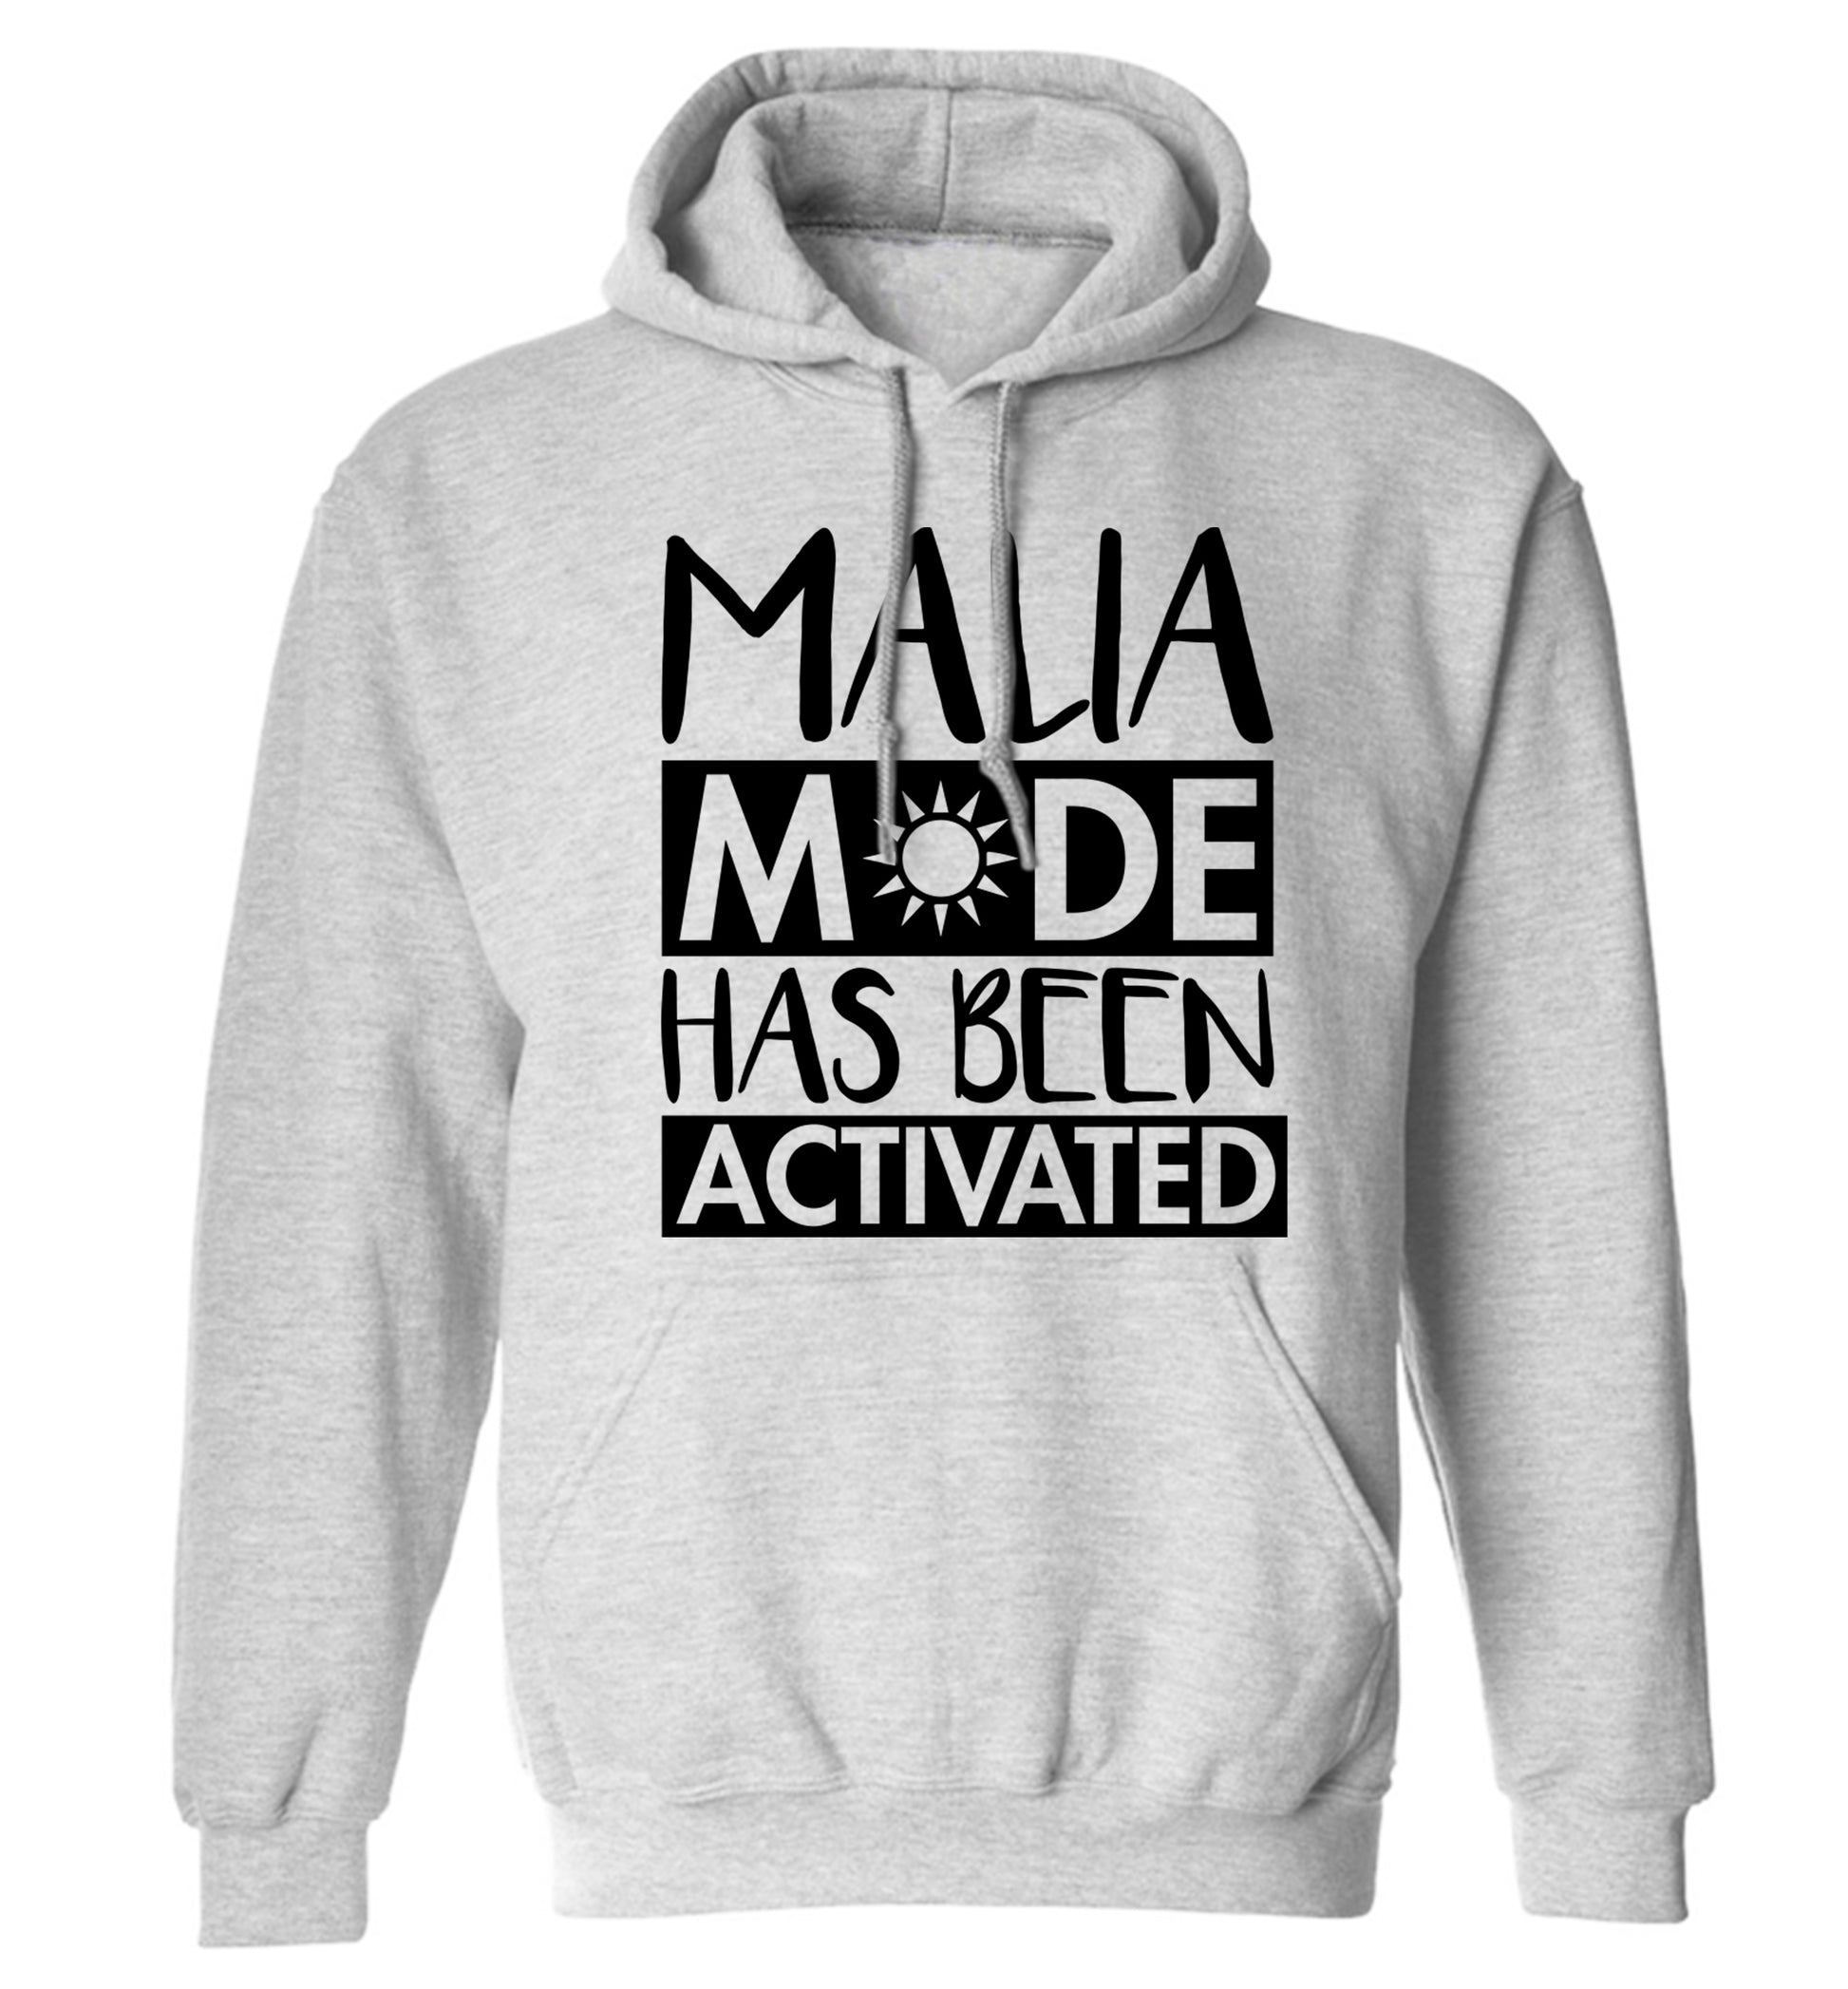 Malia mode has been activated adults unisex grey hoodie 2XL